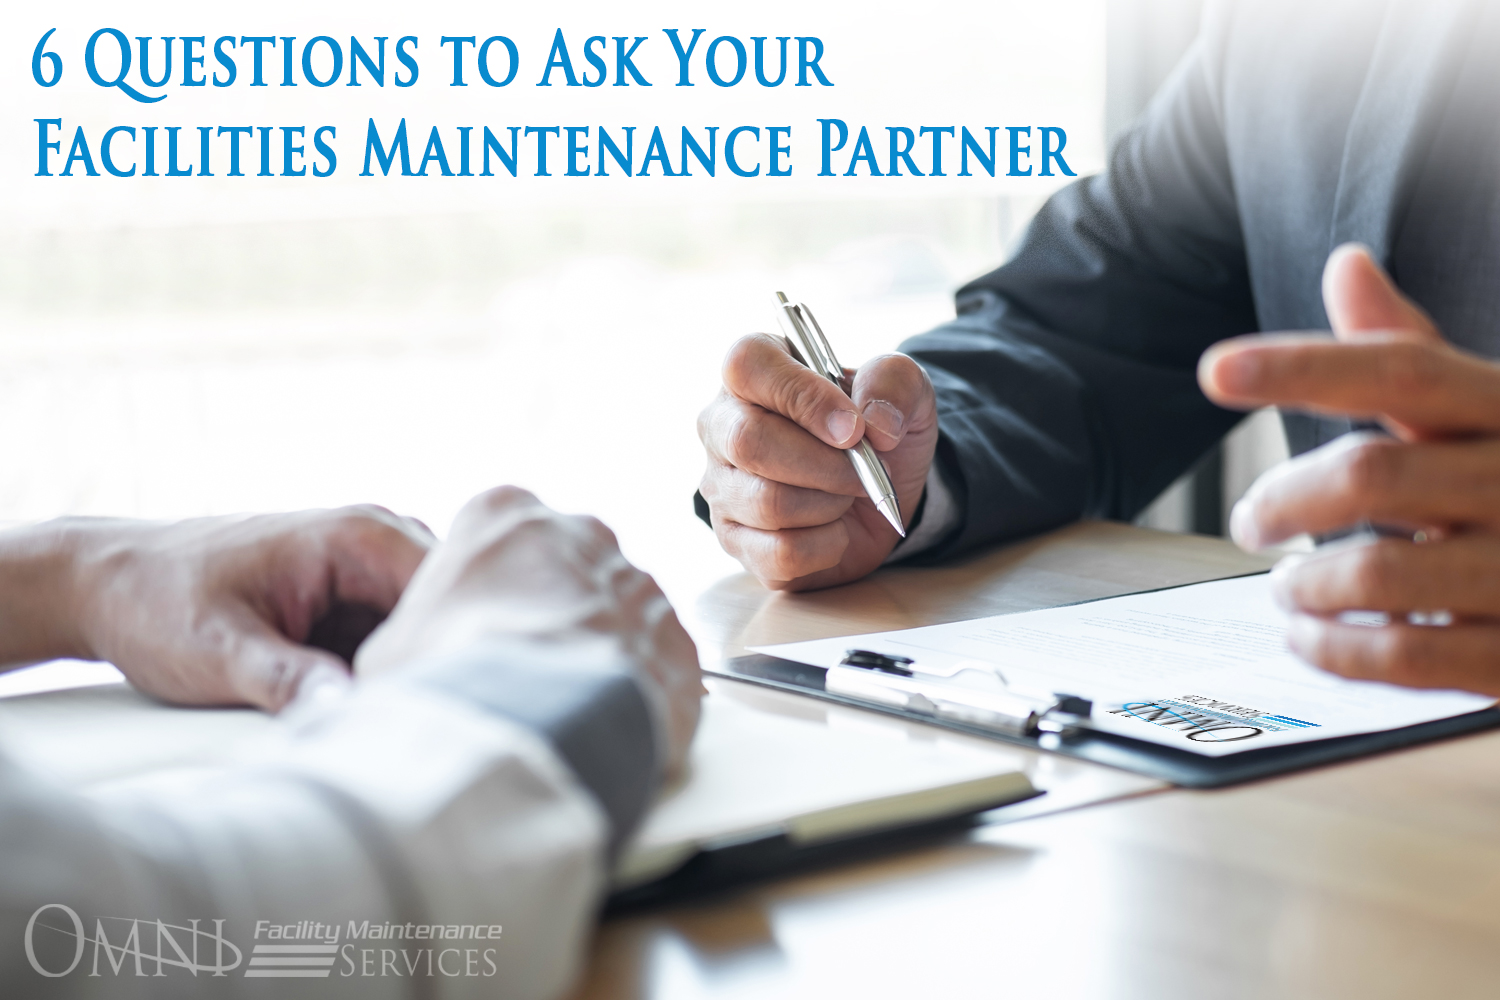 Questions to Ask Your Facilities Maintenance Partner